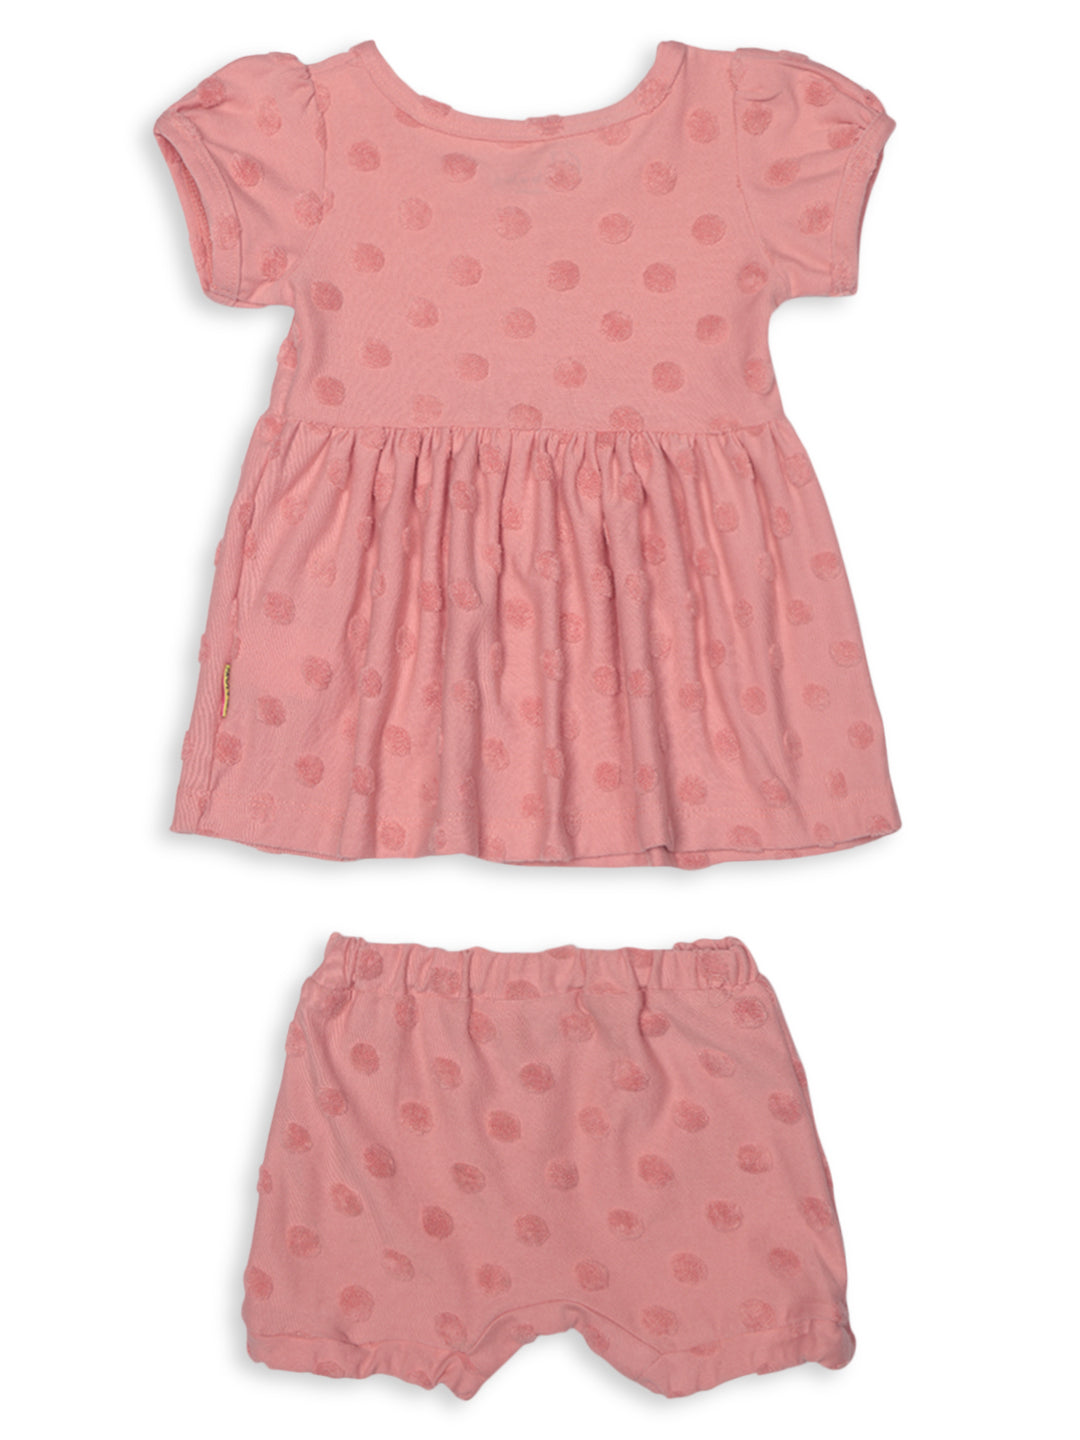 Baby Girls Pink Cotton Solid Dress